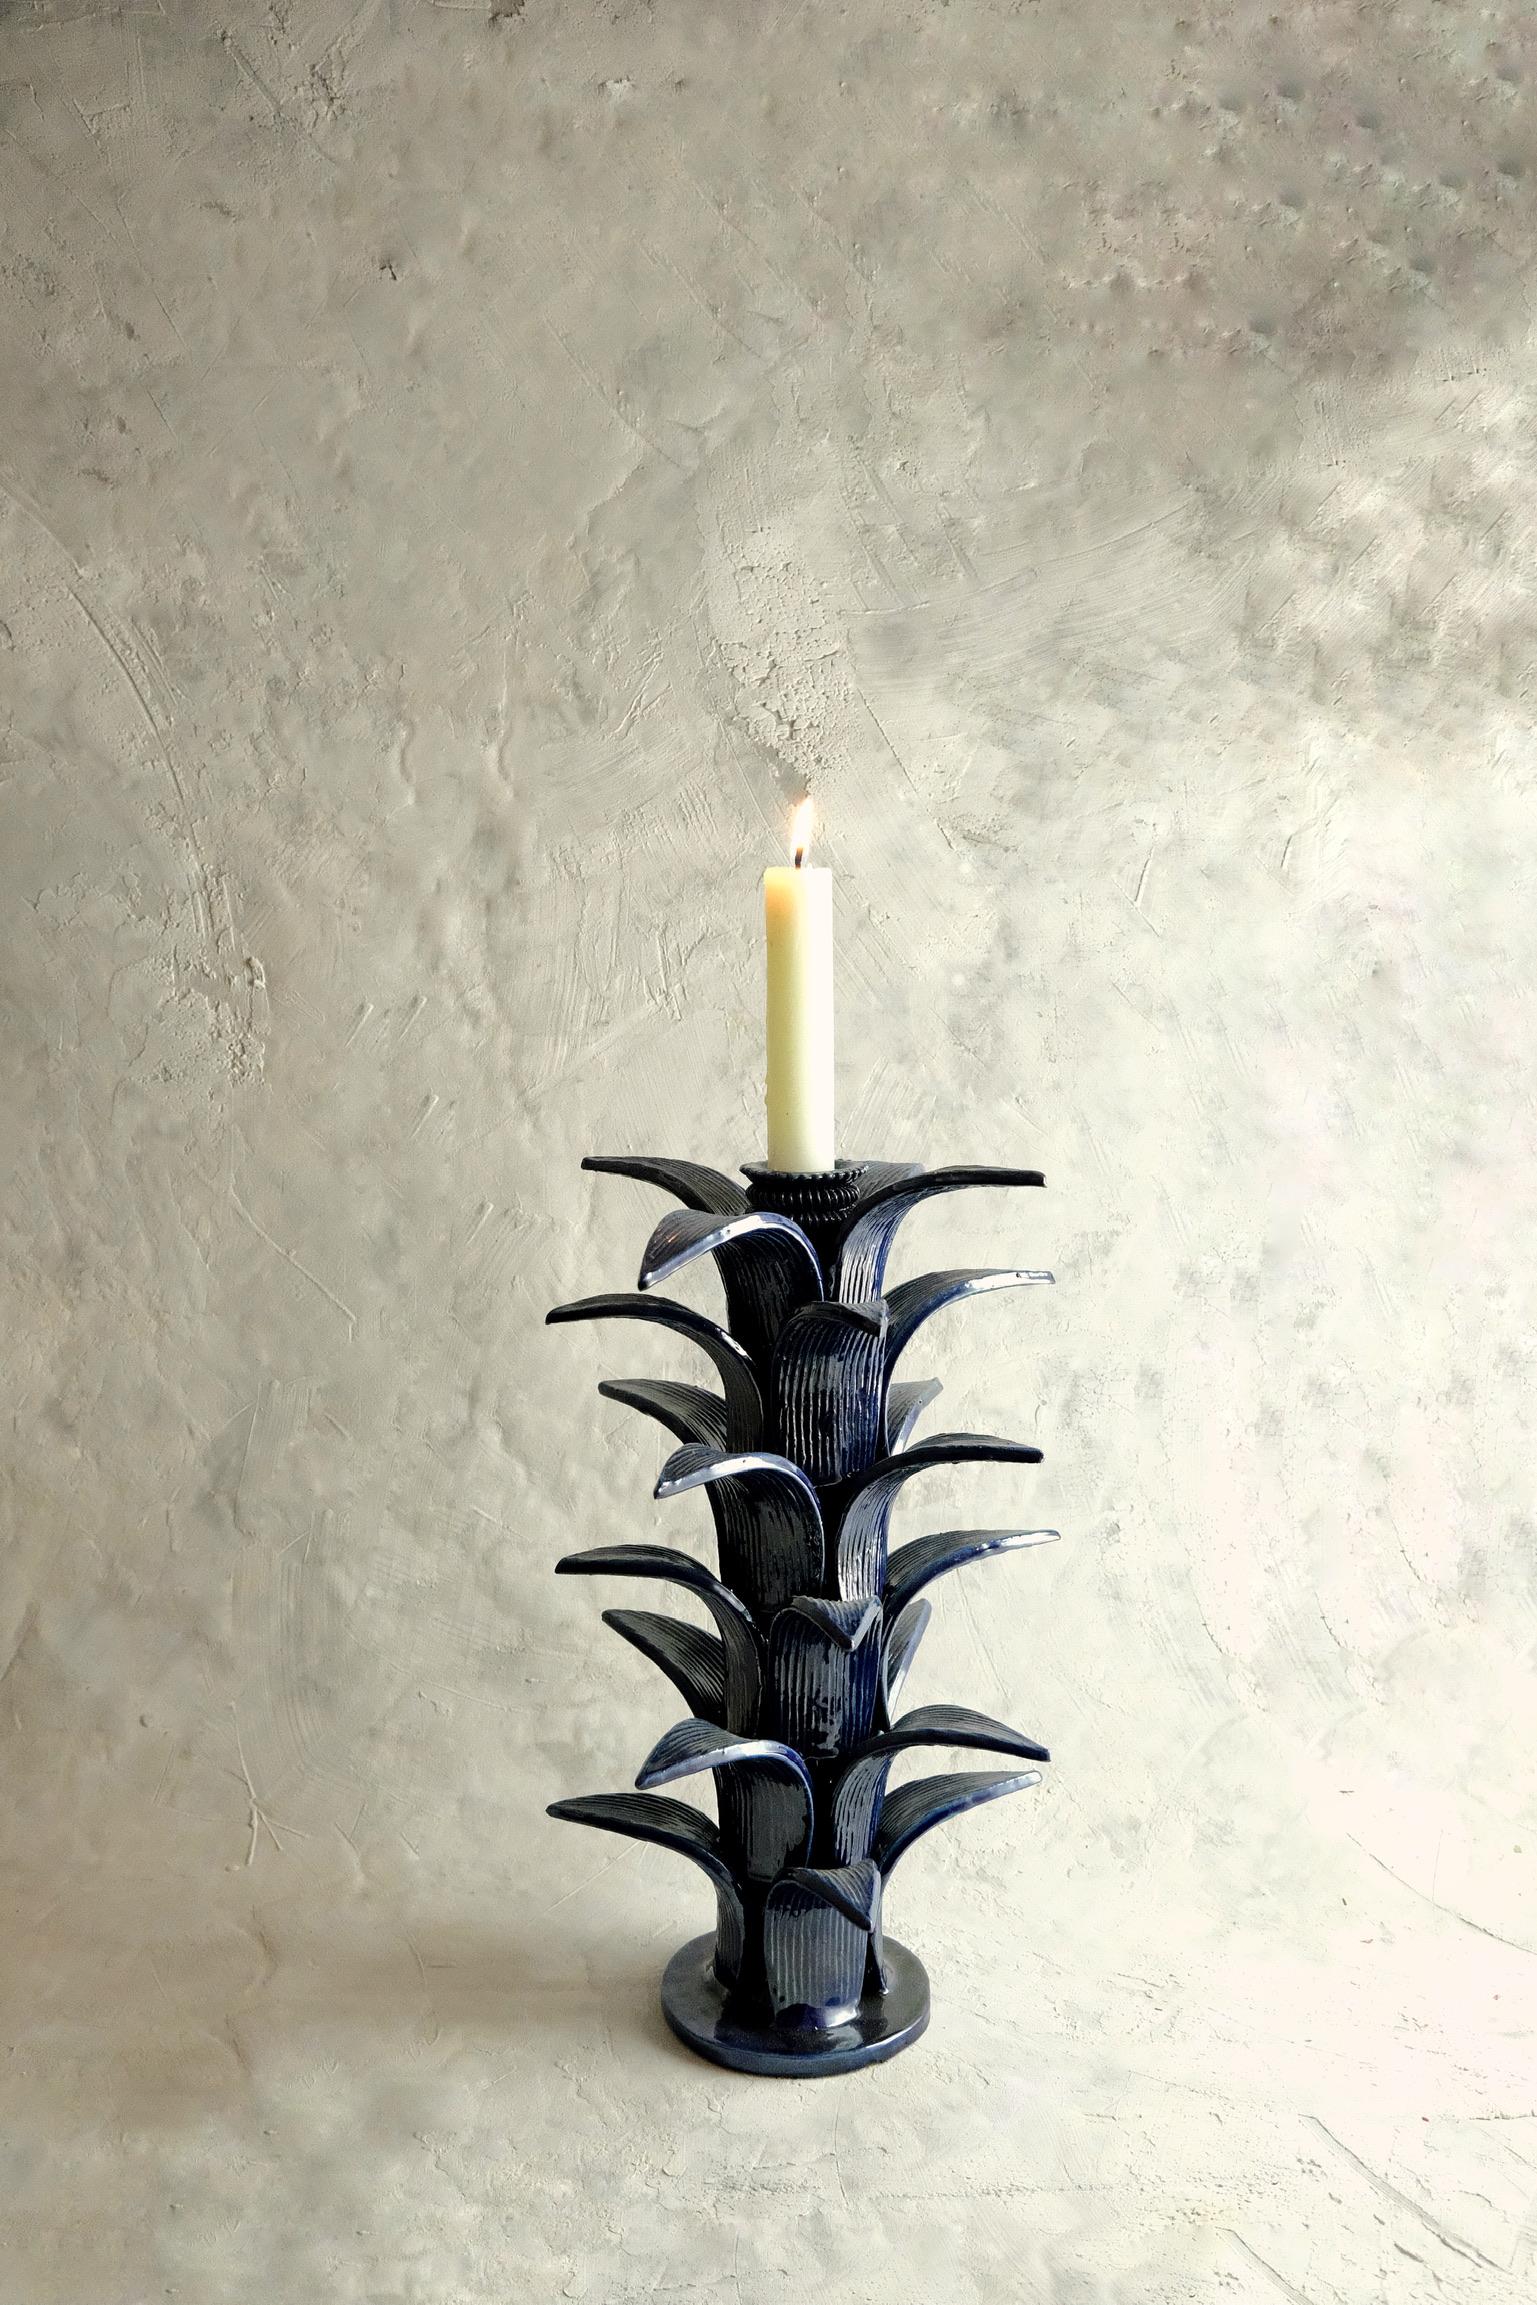 Sorgo candleholder by Onora
Dimensions: D 23 x H 38 cm
Materials: Clay, Quartz stone

Available in black, green, blue and yellow. 
Hand made in the town of San Jose de Gracia, Michoacan, Once the piece has been completely molded, a white based